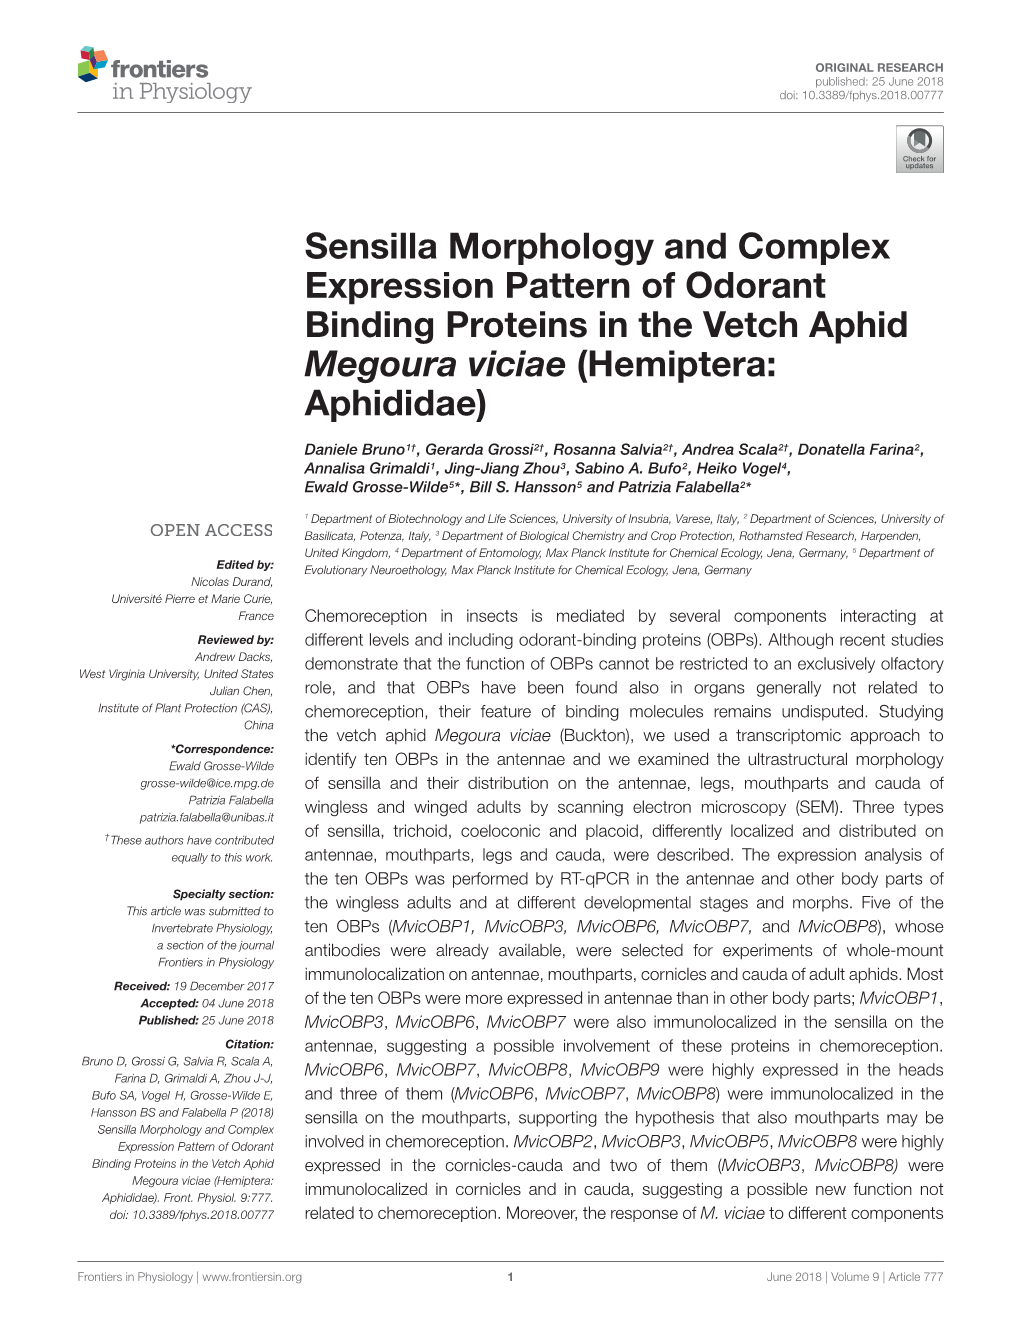 Sensilla Morphology and Complex Expression Pattern of Odorant Binding Proteins in the Vetch Aphid Megoura Viciae (Hemiptera: Aphididae)